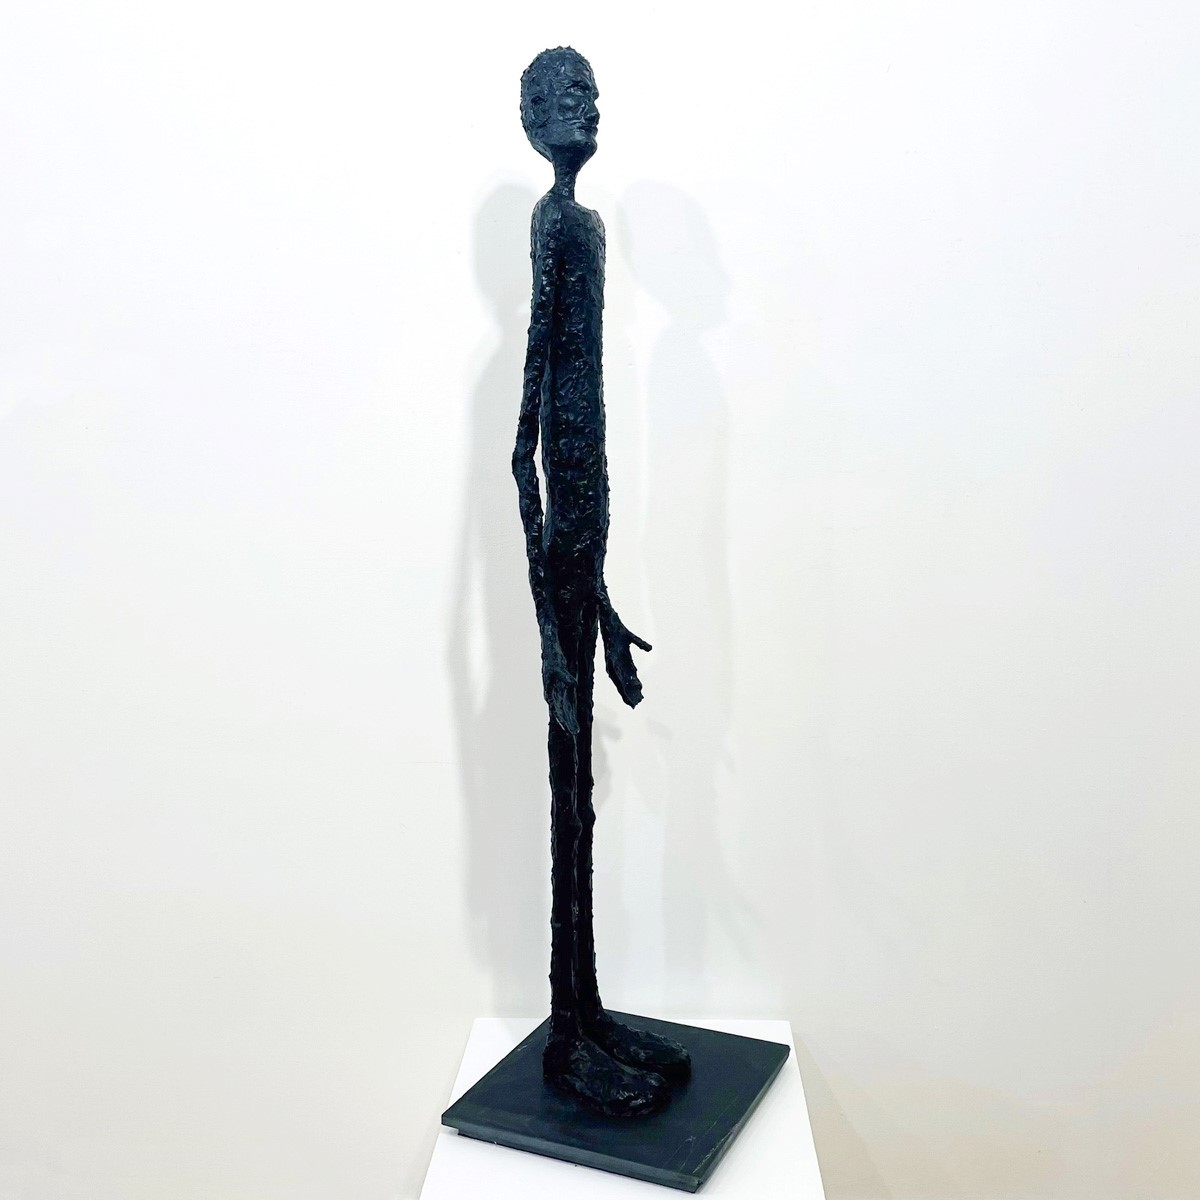 'Etruscan Man ' by artist James Daly